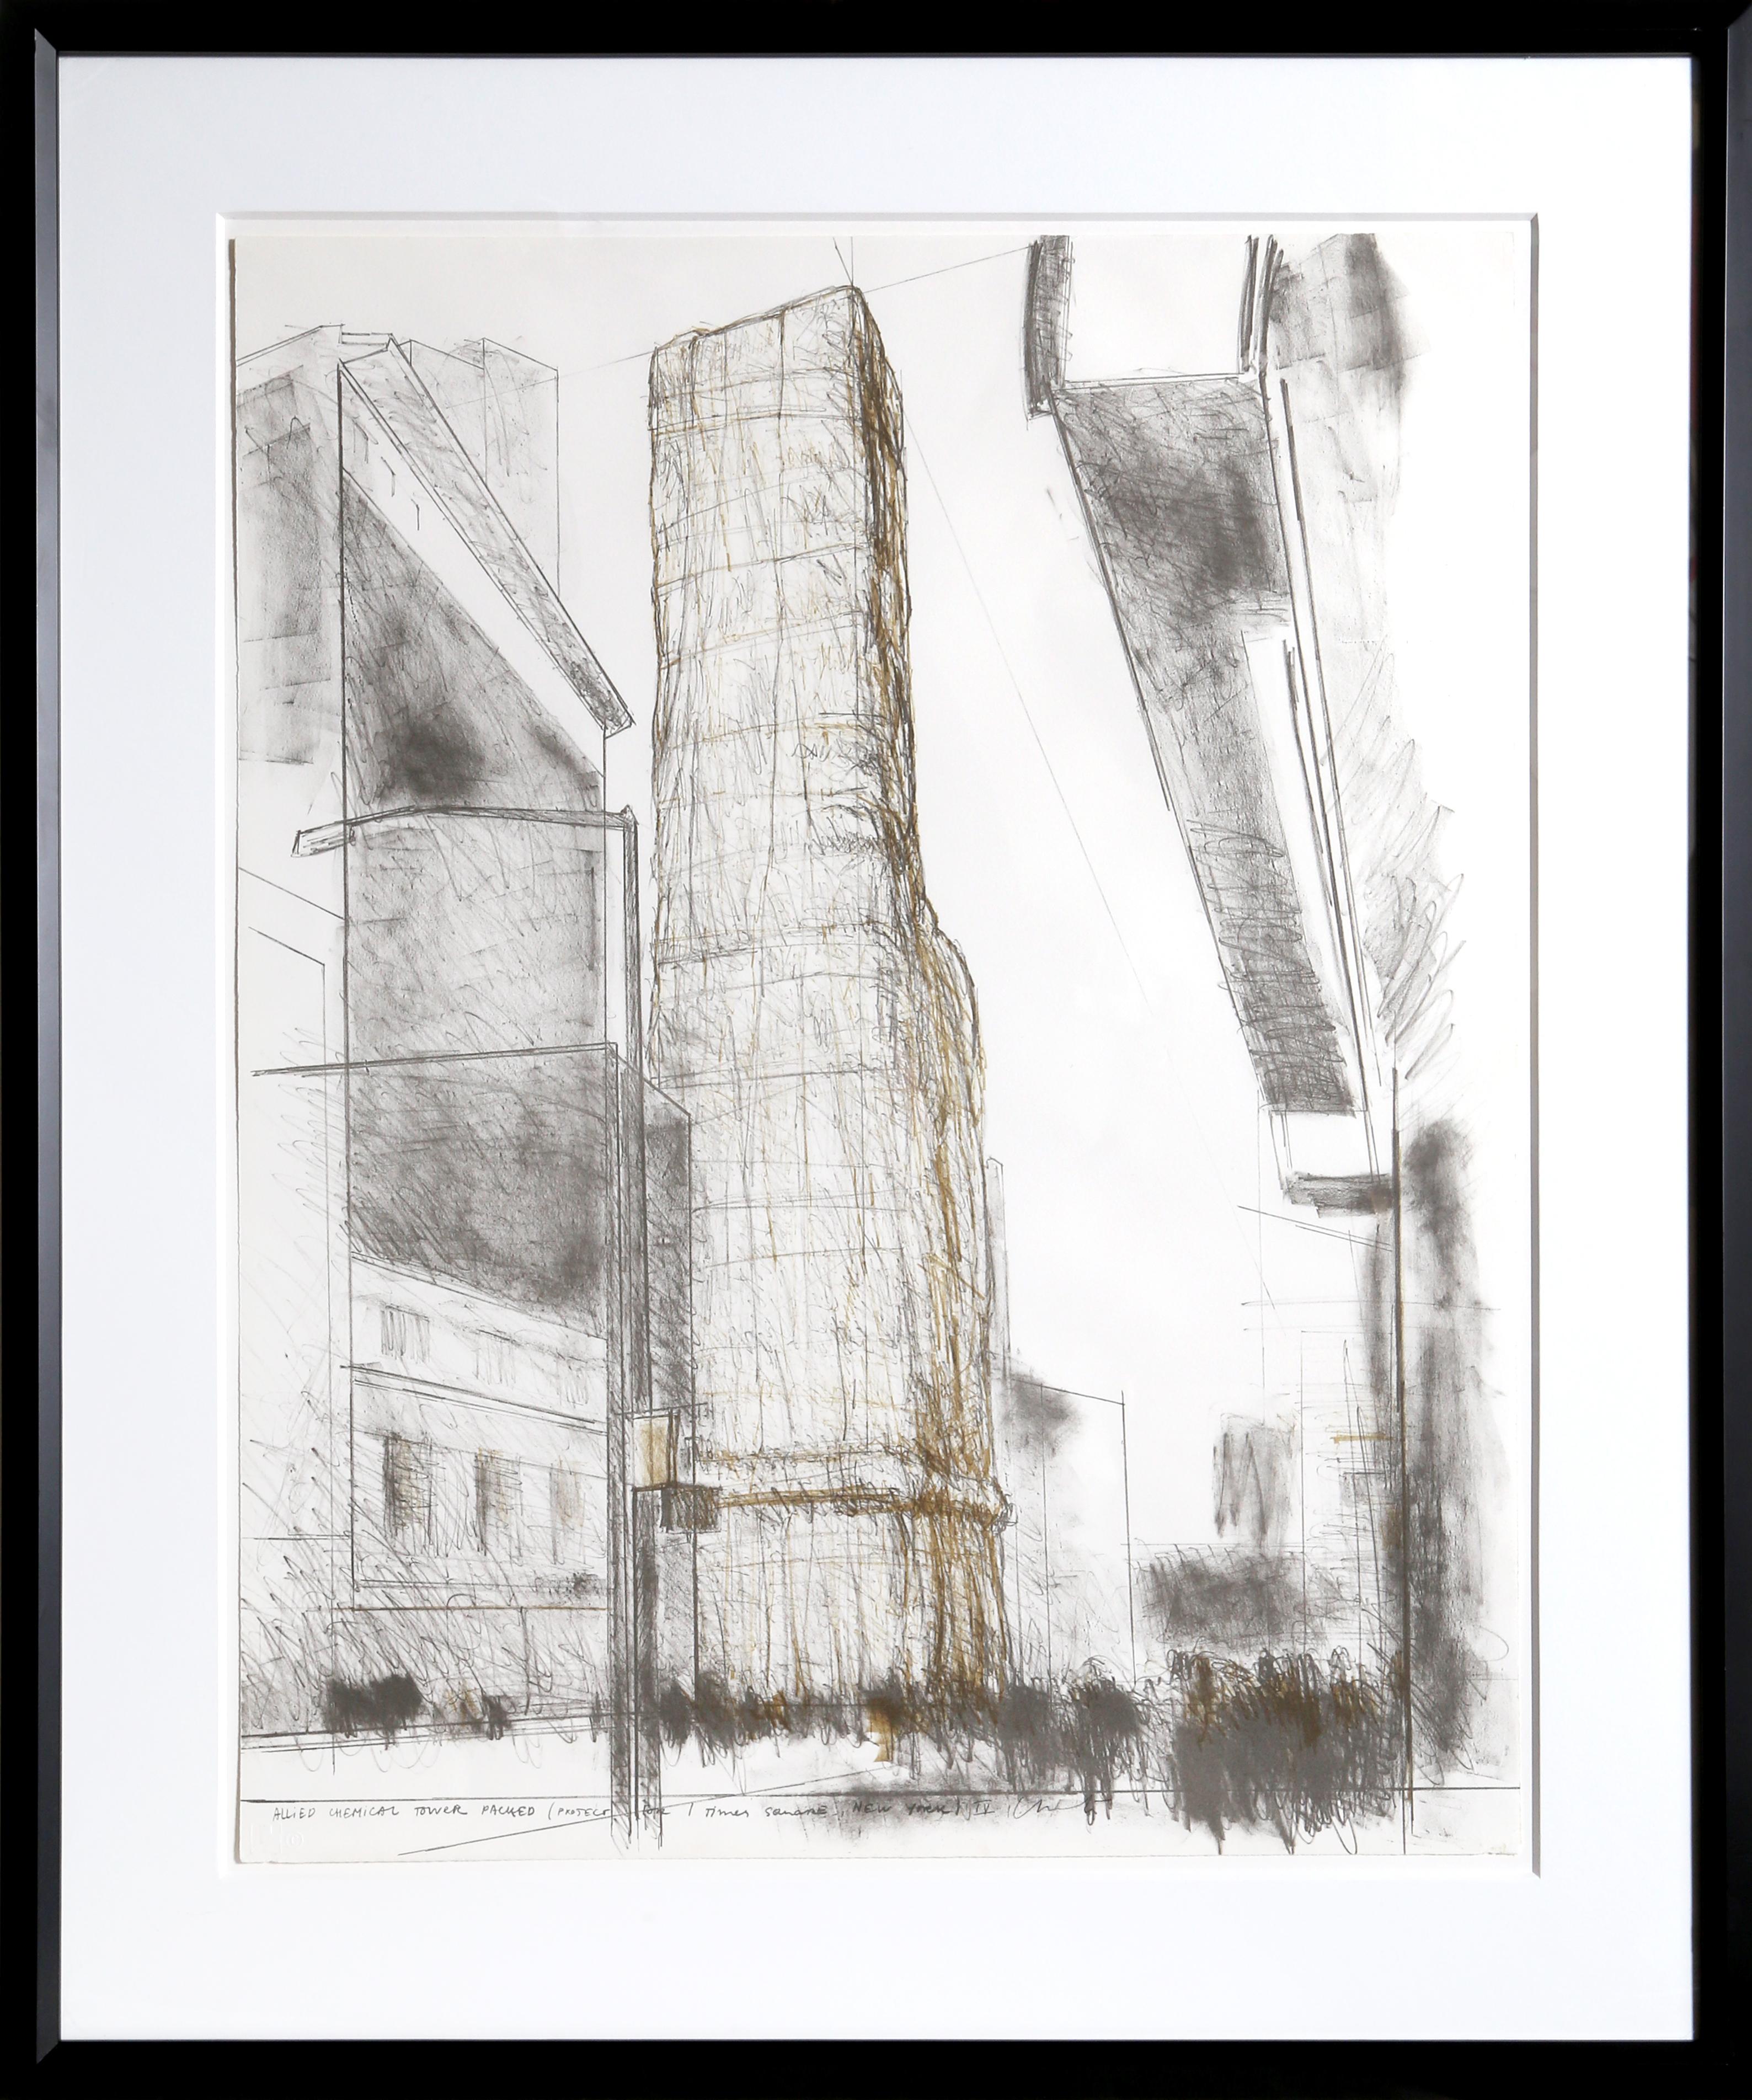 Christo and Jeanne-Claude Landscape Print - Allied Chemical Tower, Packed, Project for 1 Times Square